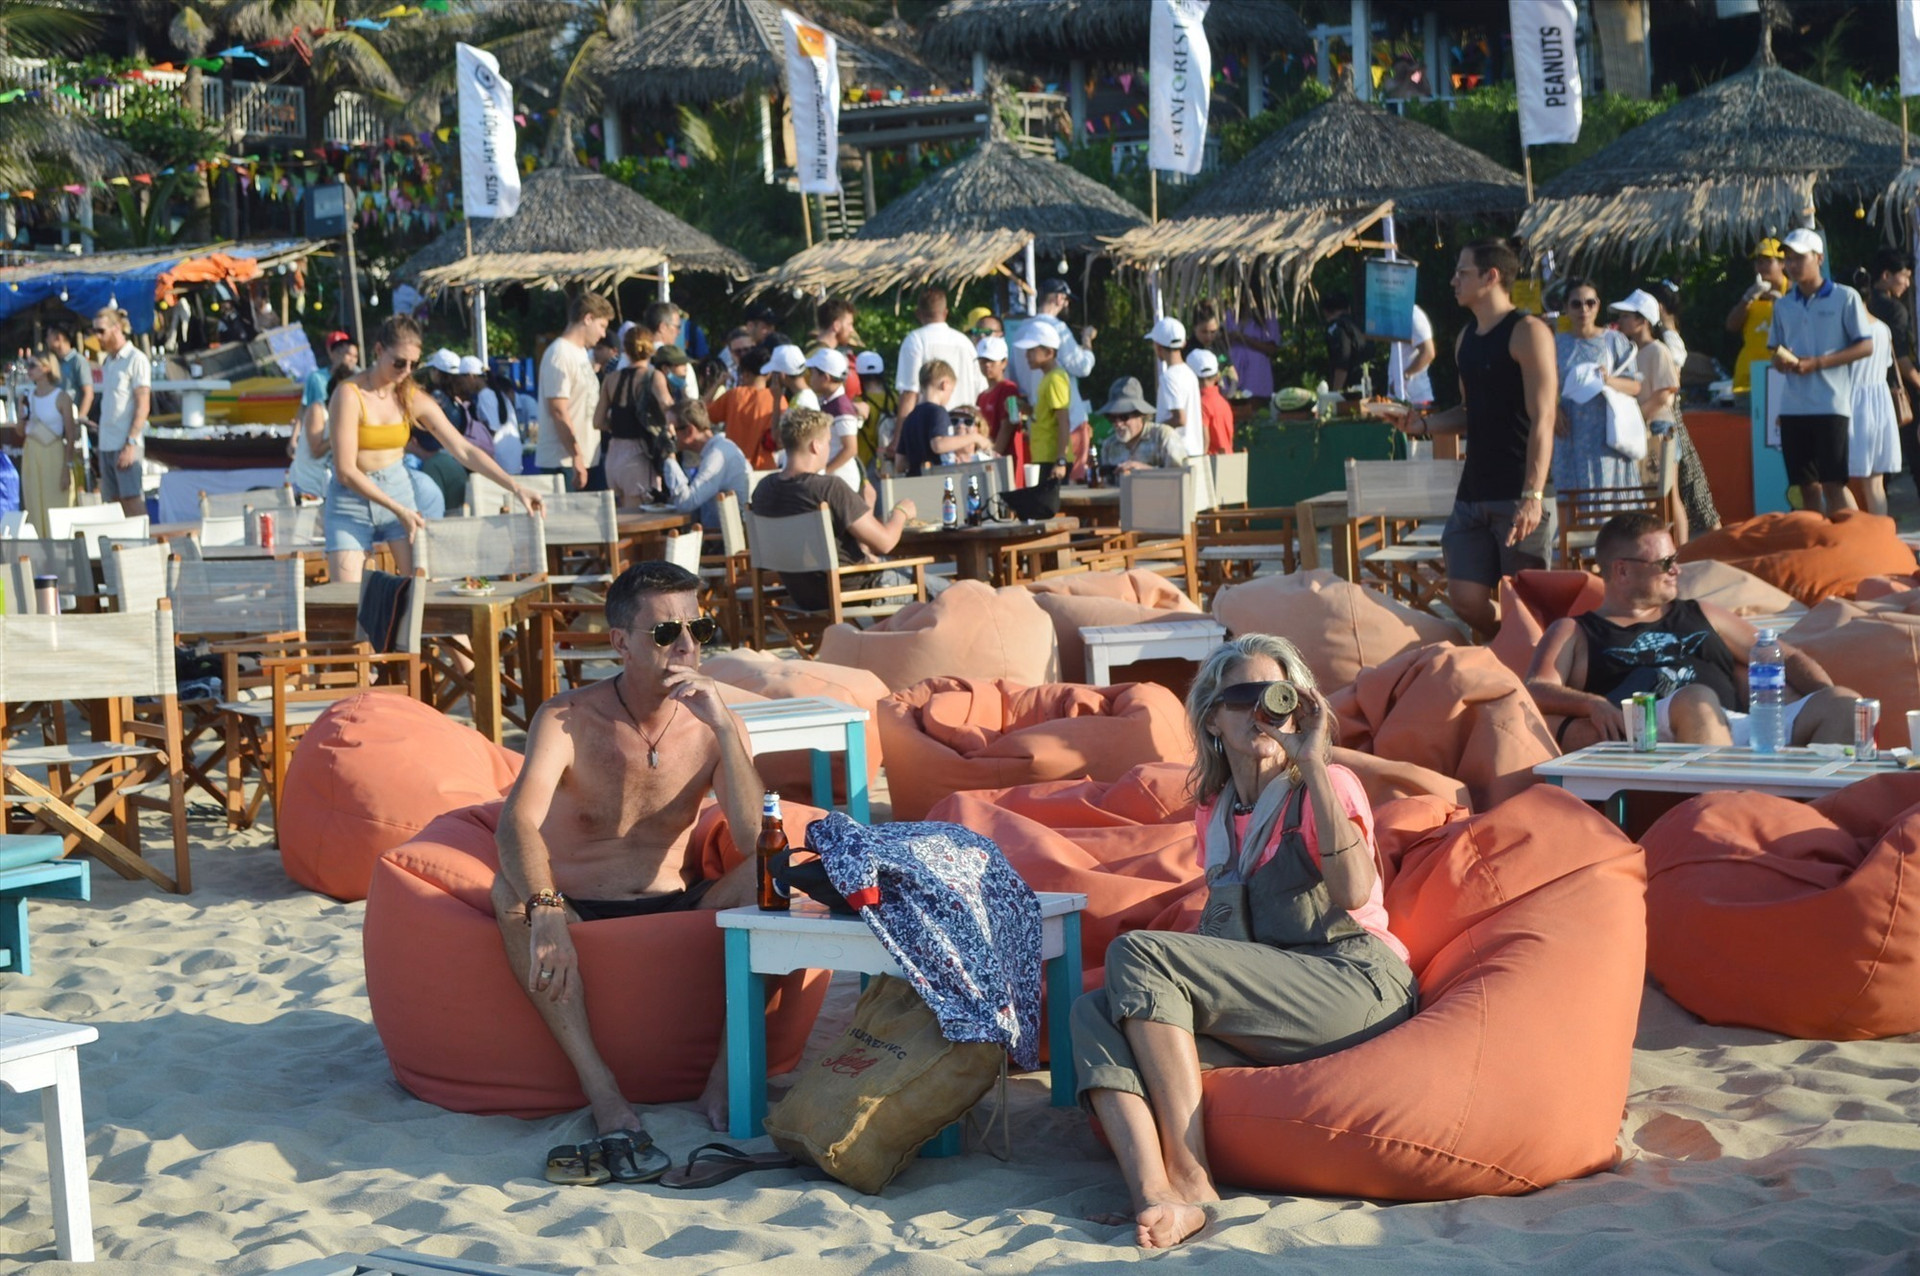 Tourists are waiting for the festival at the beach